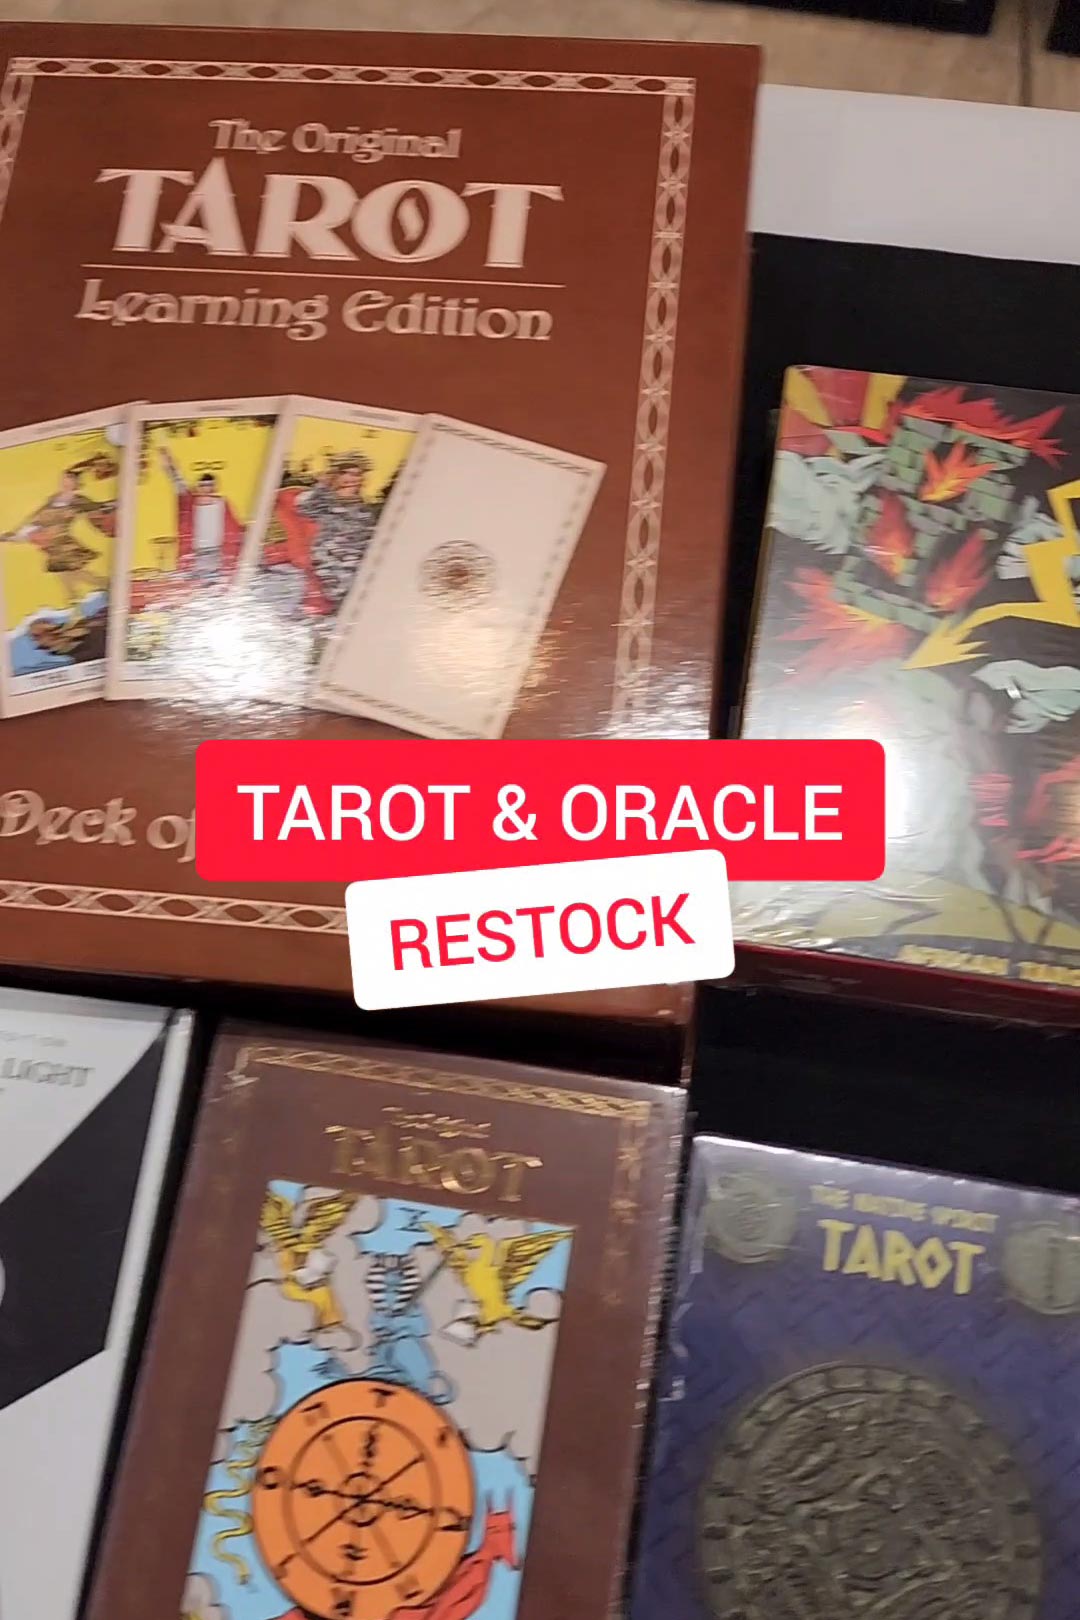 More Tarot and Oracle Decks!